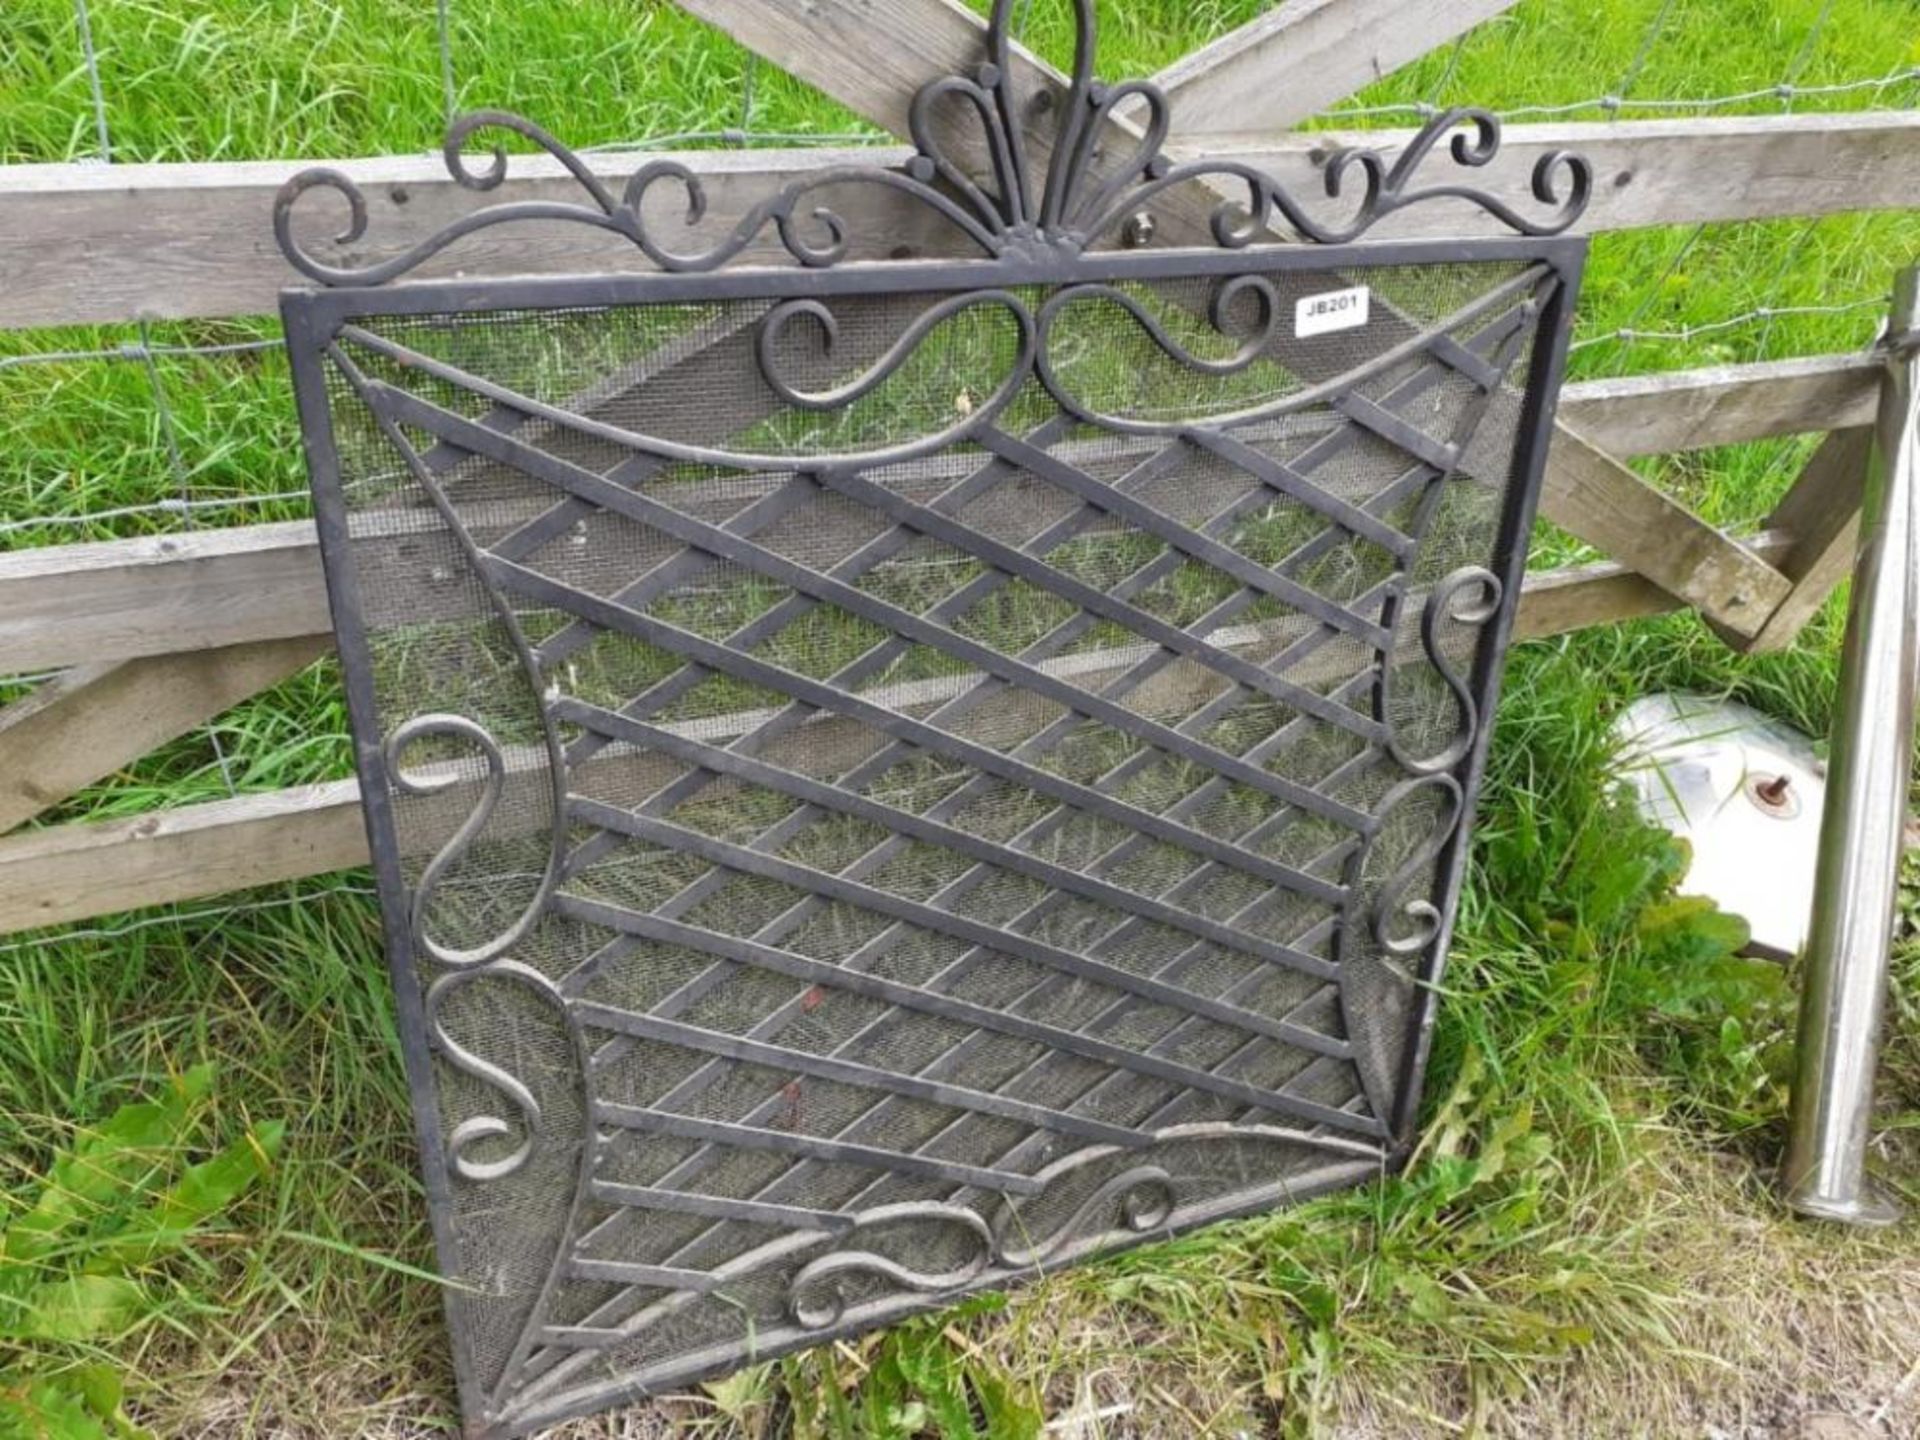 1 x Ornate Iron Fire Guard - Dimensions: width 76cm x height 92cm - Ref: JB201 - Pre-Owned - NO VAT - Image 3 of 3